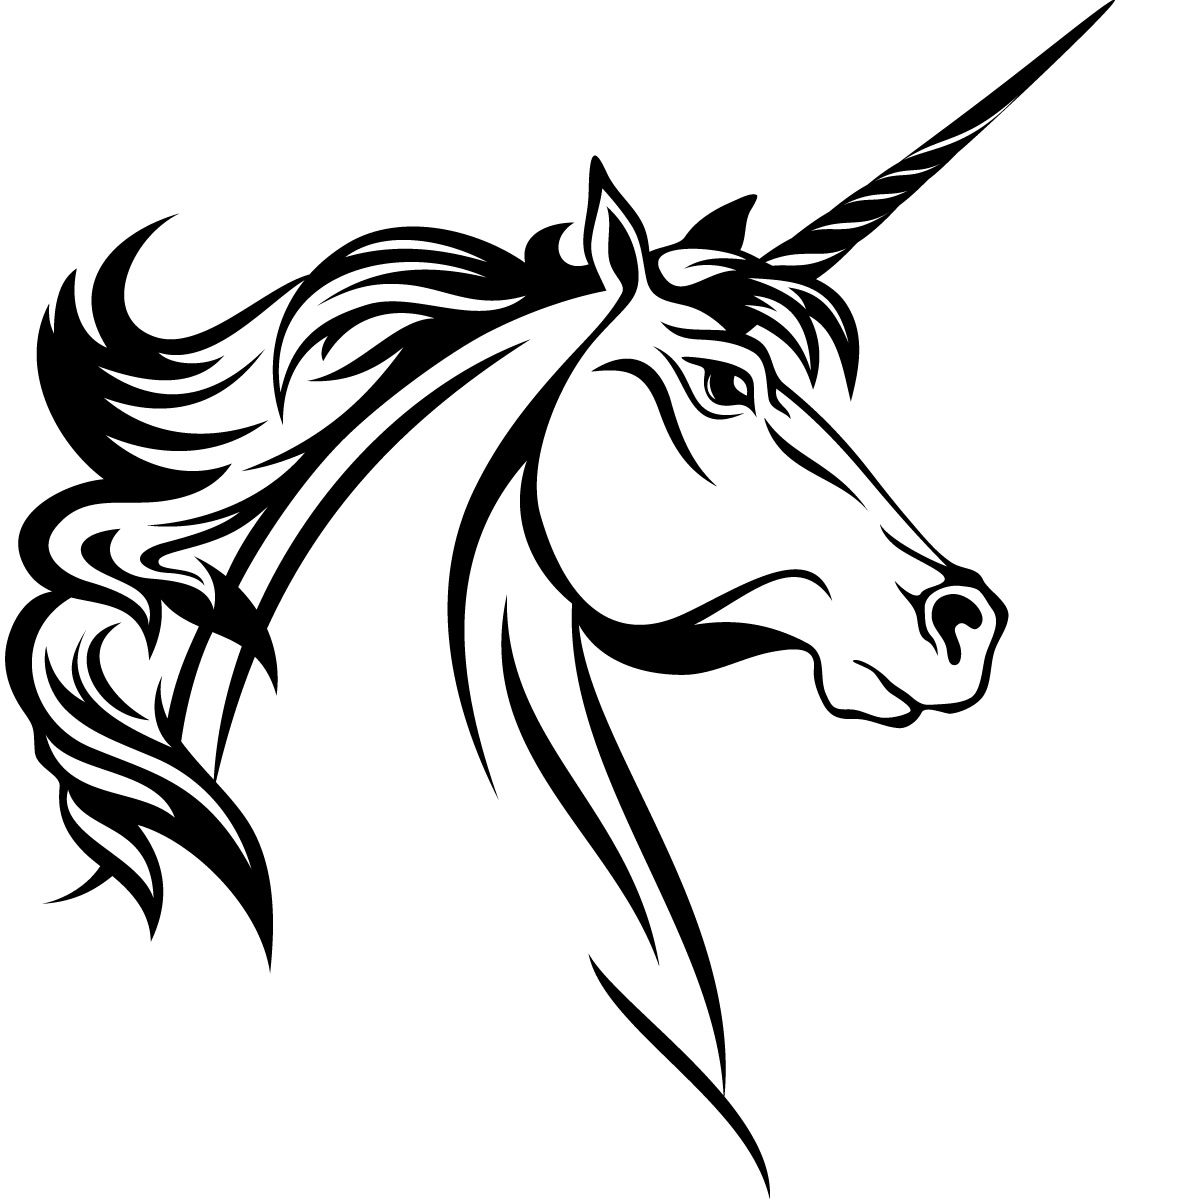 Horse Head Line Drawing - ClipArt Best